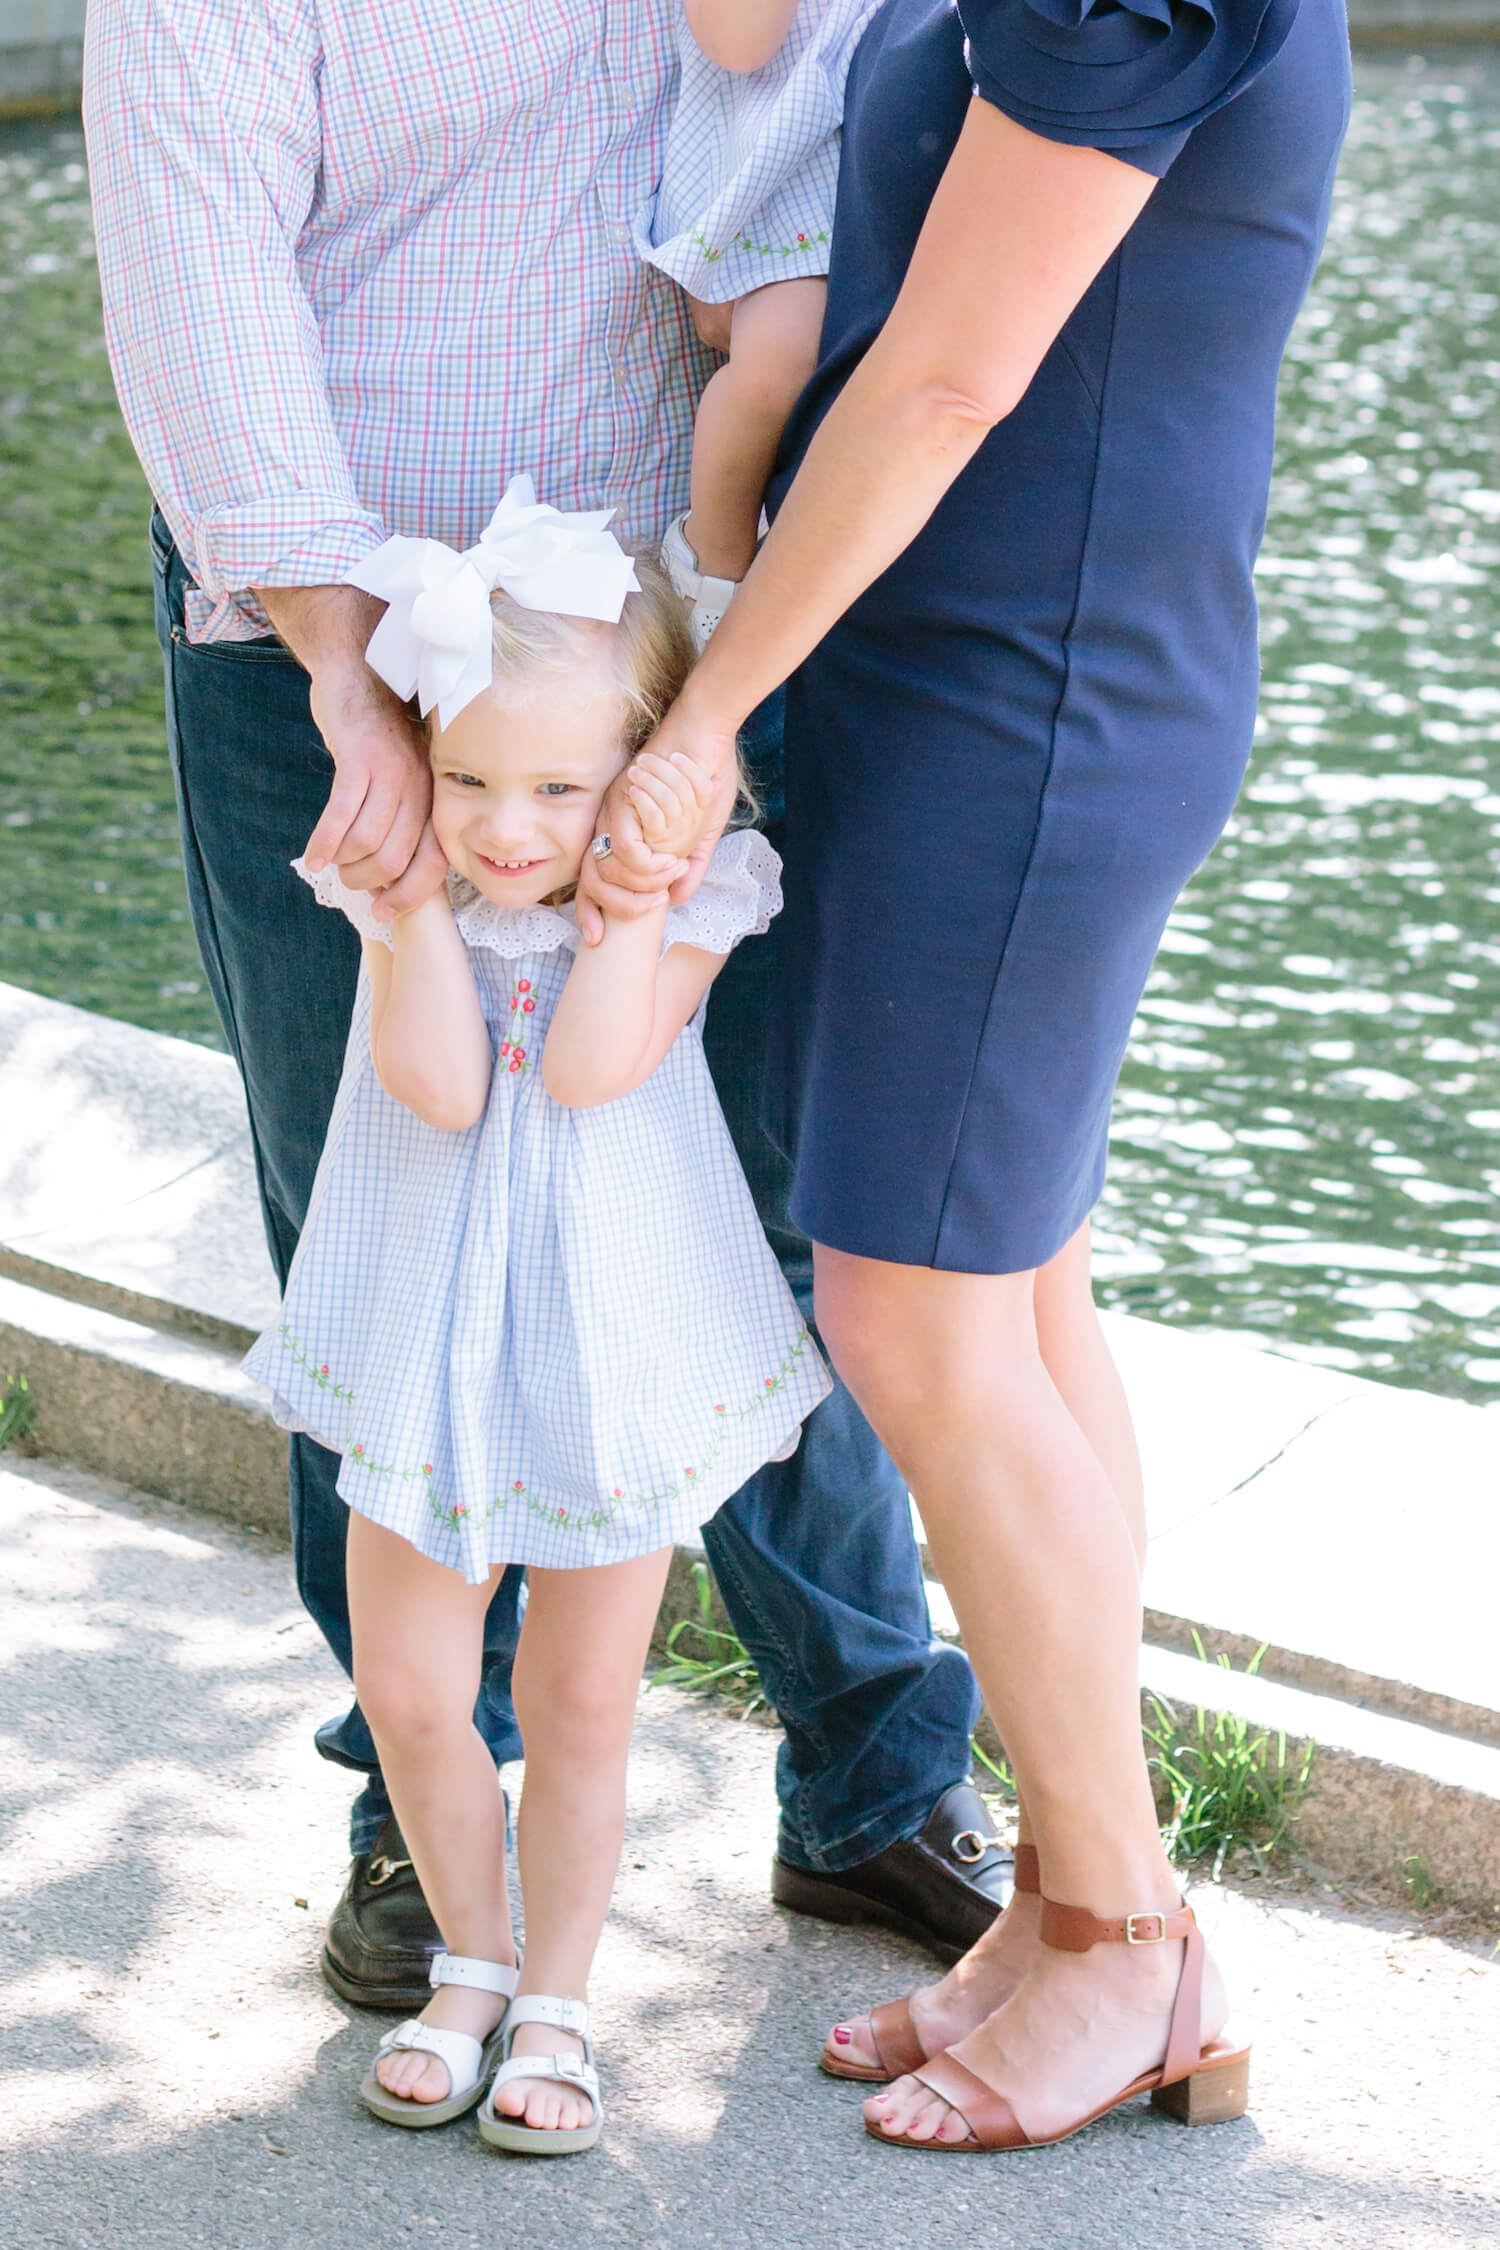 New York Family Photographer, Jacqueline Clair Photography features their latest family session in Central Park